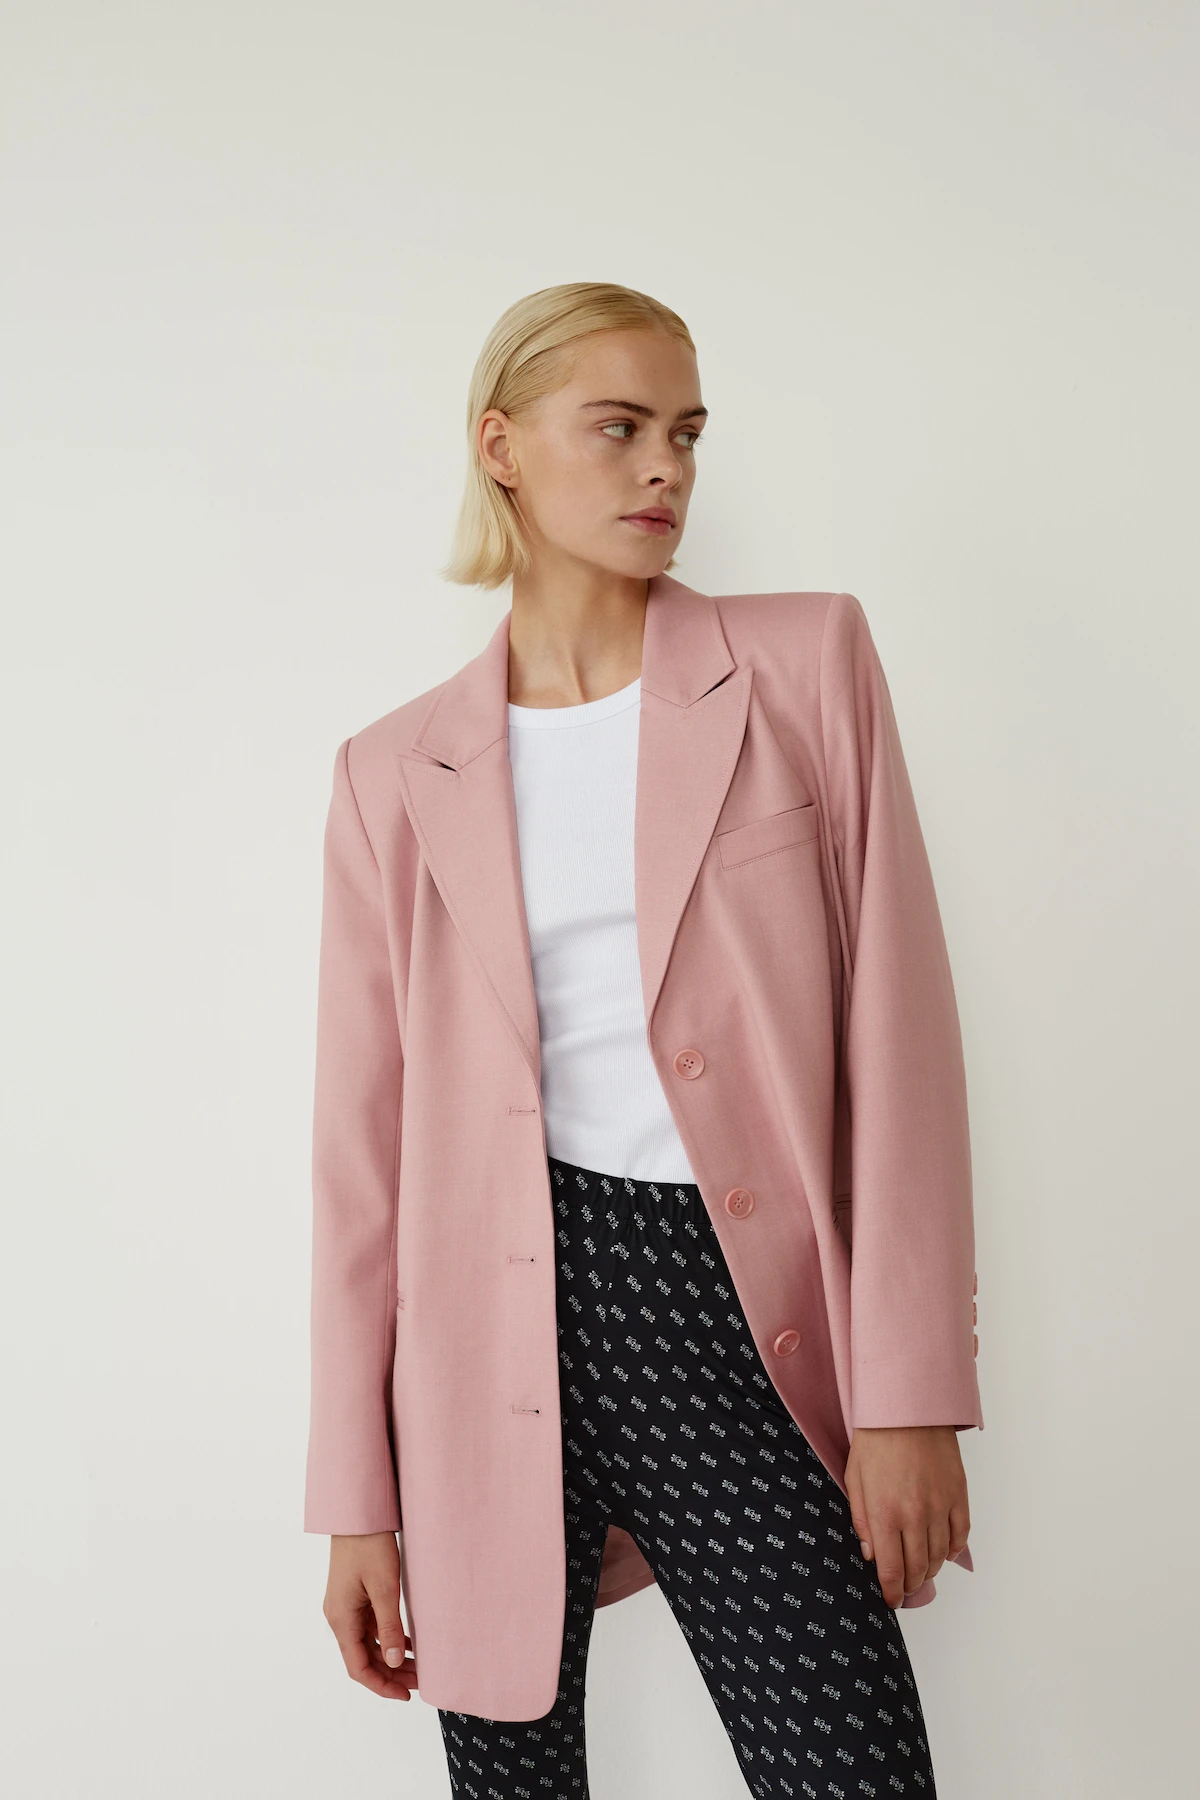 Cheap blazers and jackets on sale - buy jackets online here